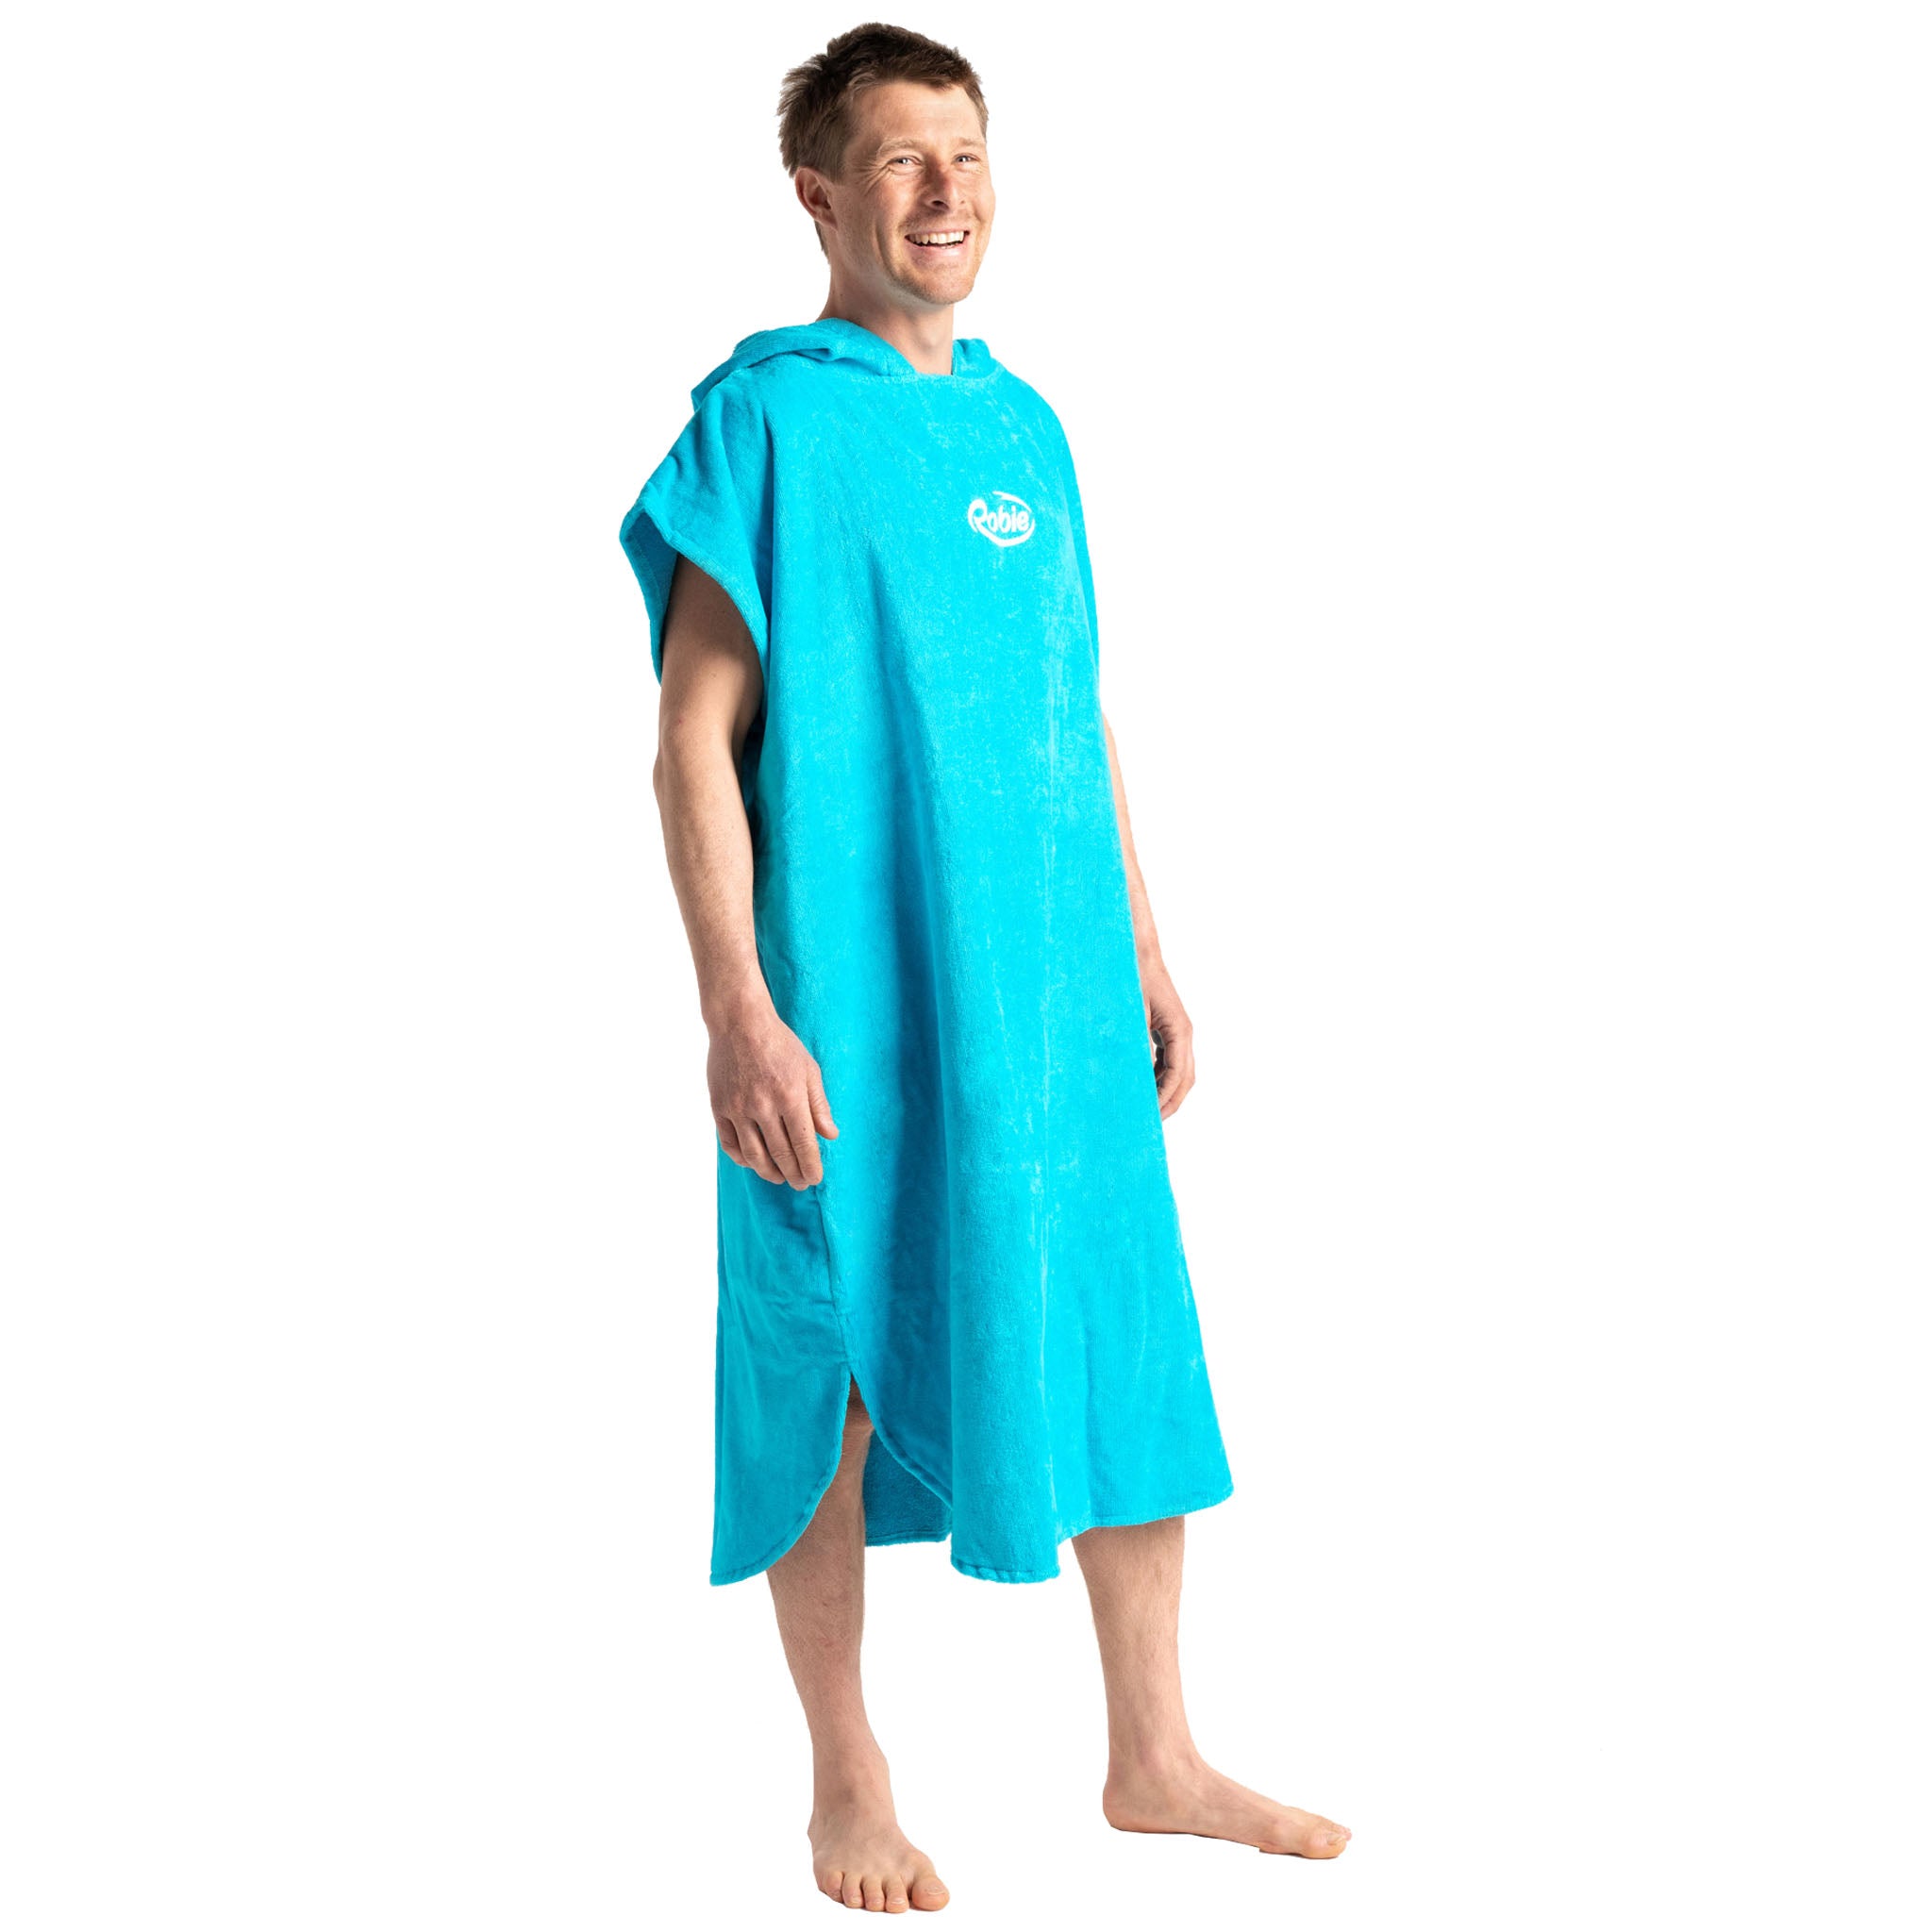 Robie Robes Original Towelling Beach Changing Robe Poncho - Blue Atoll Unisex design